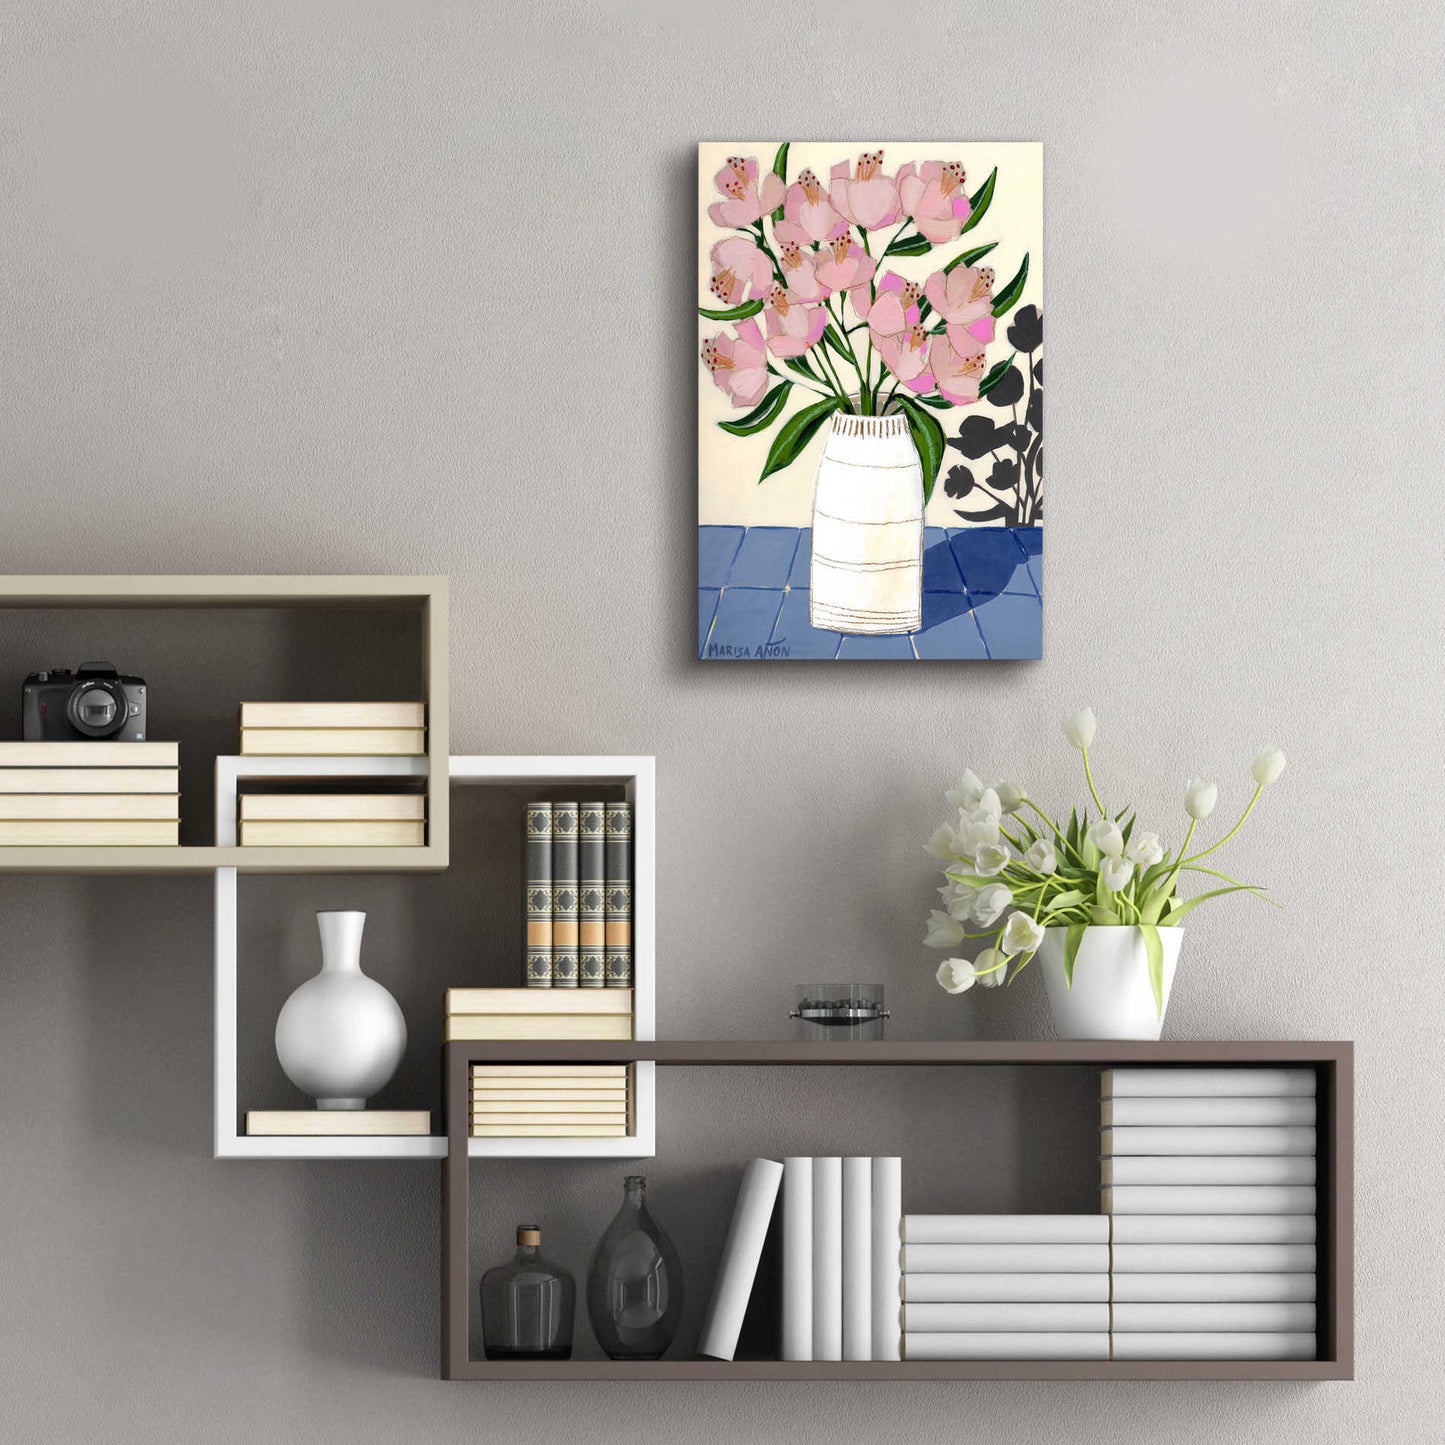 Epic Art 'Spring Florals 5' by Marisa Anon, Acrylic Glass Wall Art,16x24